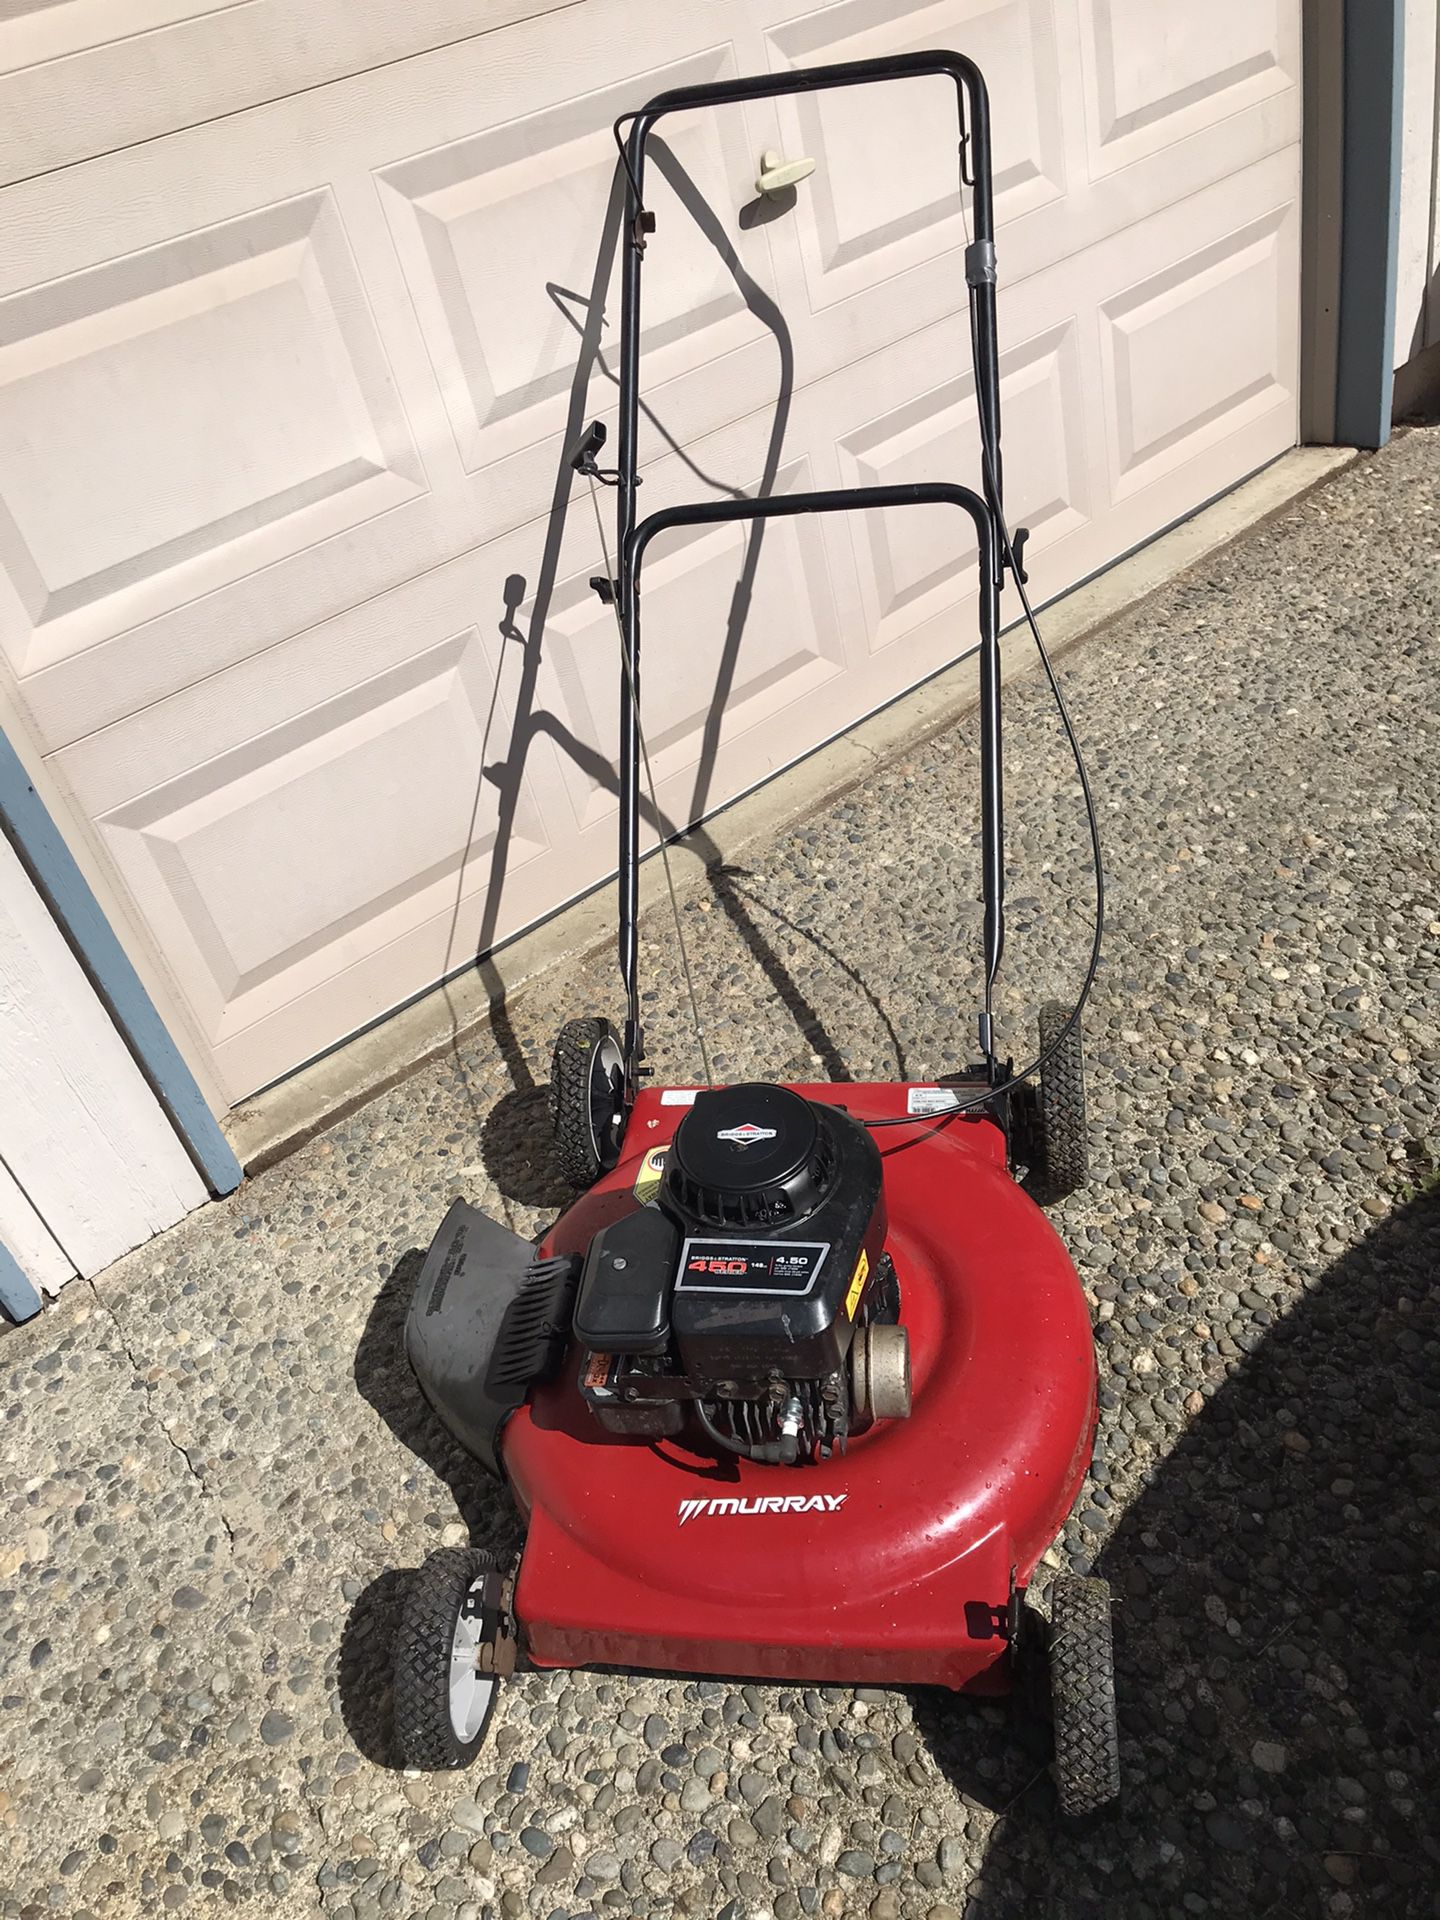 21” gas push lawn mower w/side discharge